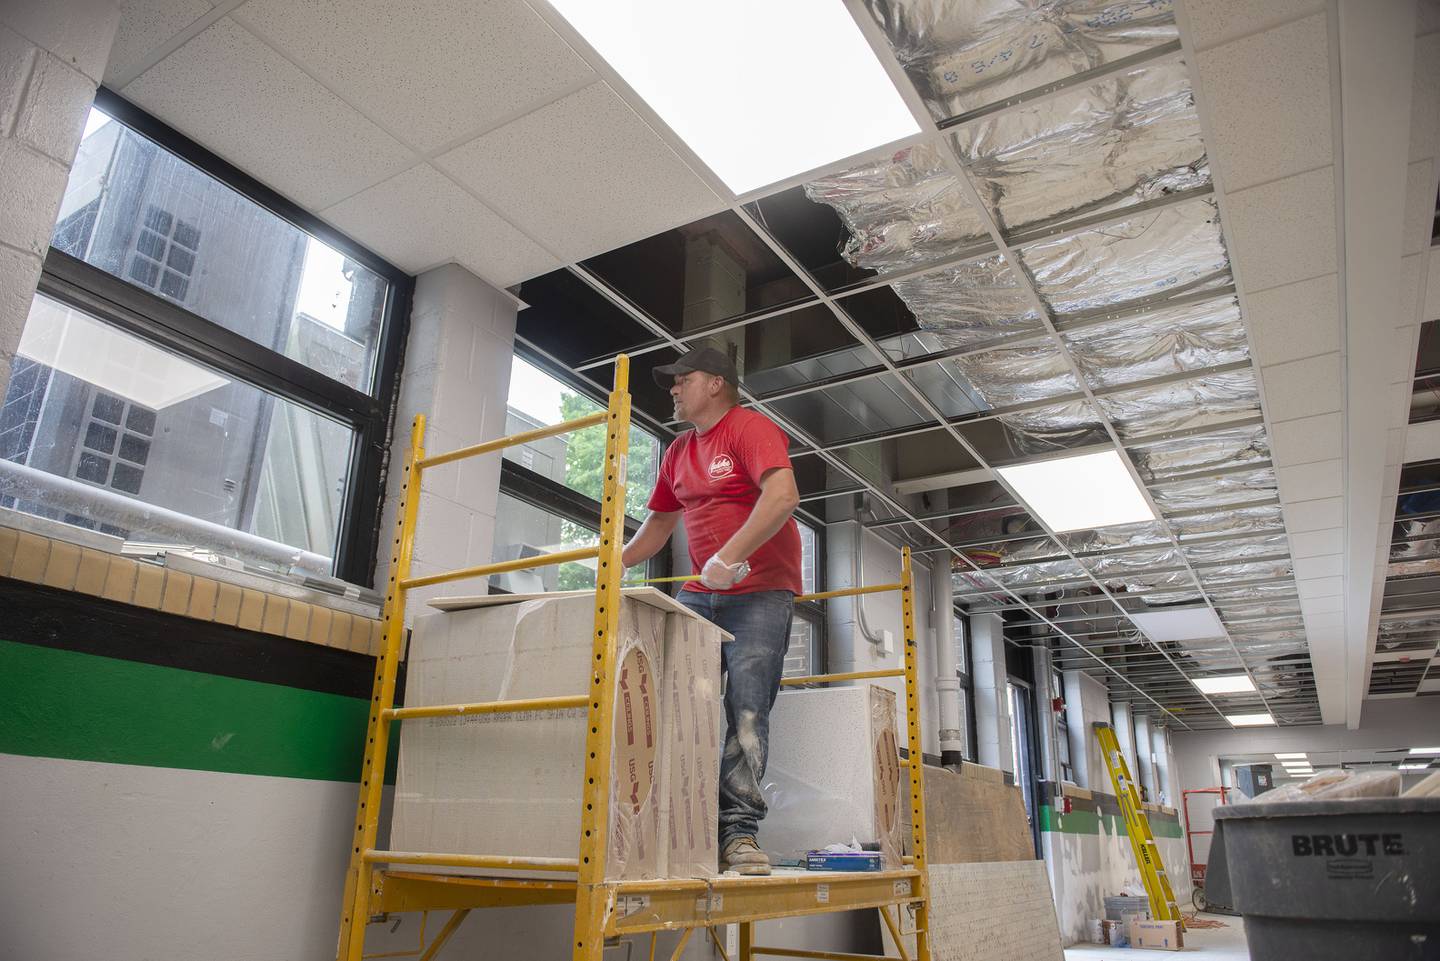 Kenny Wolf of Gehrke Construction works on the ceiling tiles Wednesday, July 27, 2022 in Rock Falls High School’s renovated cafeteria. The kitchen and dining area has undergone extensive updating.